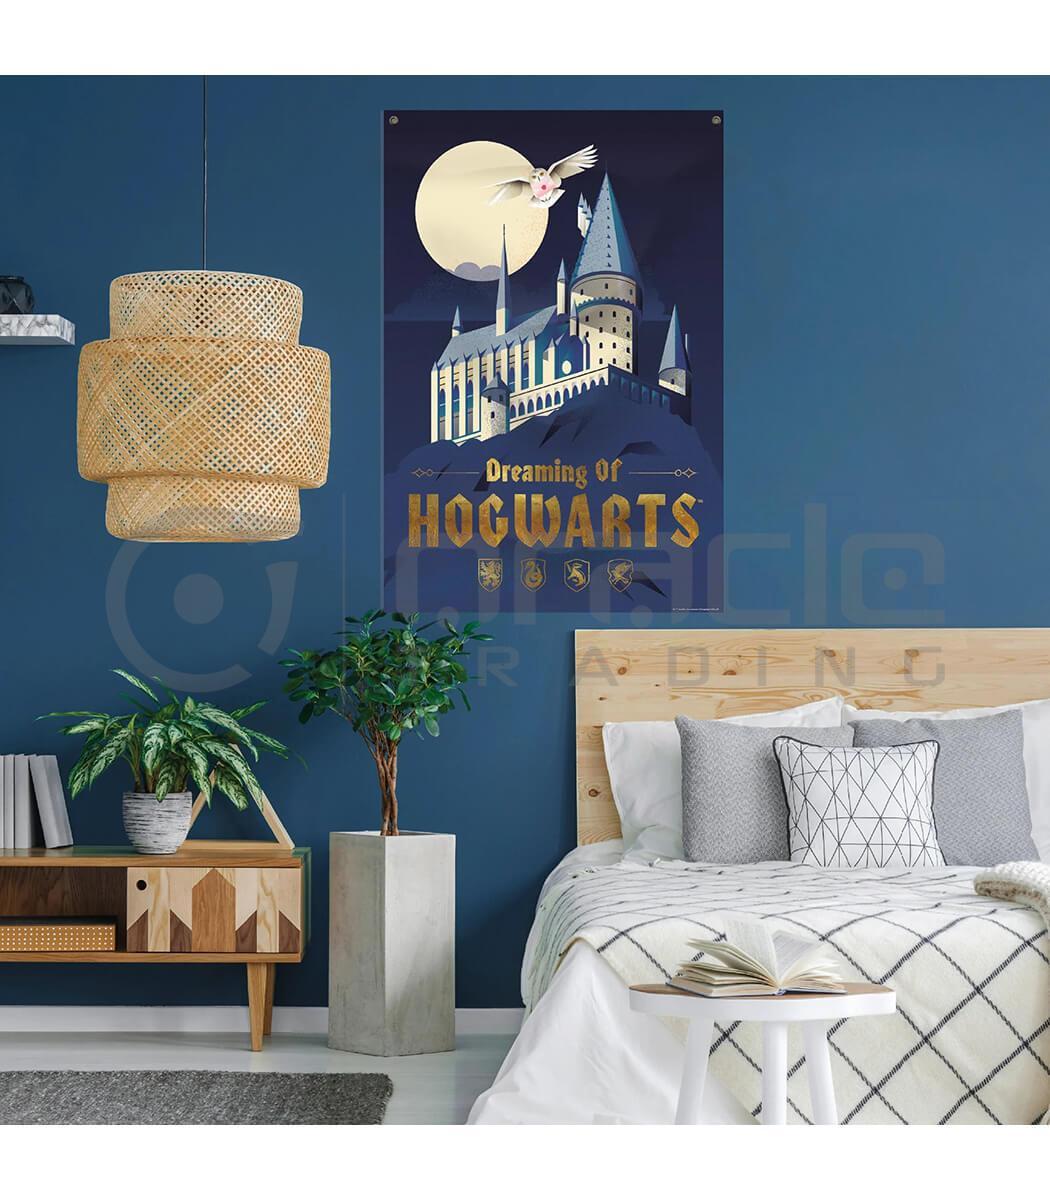 Harry Potter Banner - Dreaming of Hogwarts (XL) – Oracle Trading Inc.